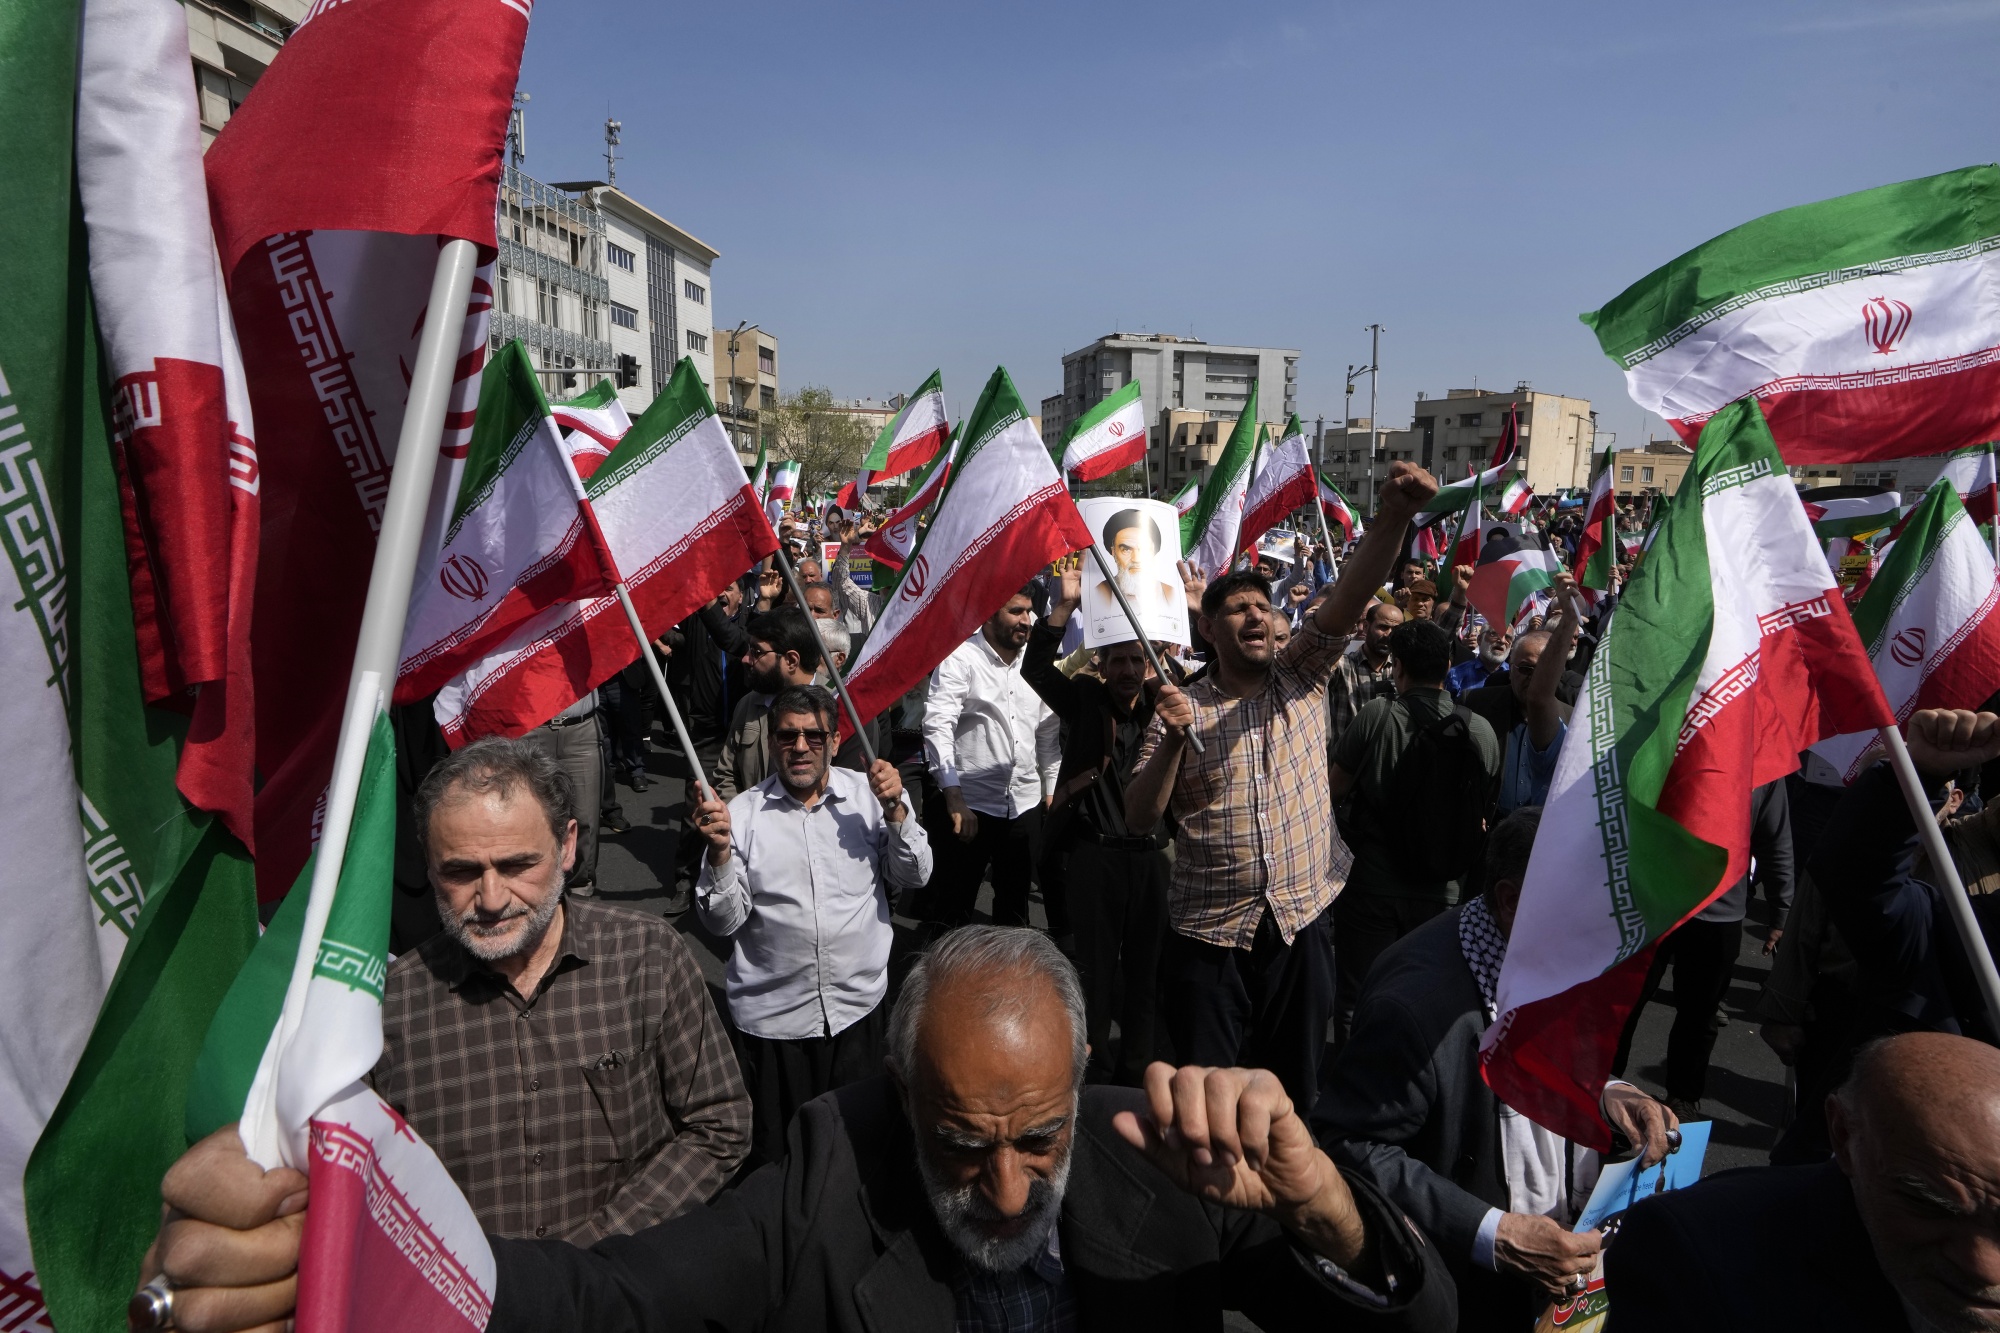 Worshippers chant slogans during an anti-Israeli gathering after Friday prayers in Tehran, Iran, on April 19.